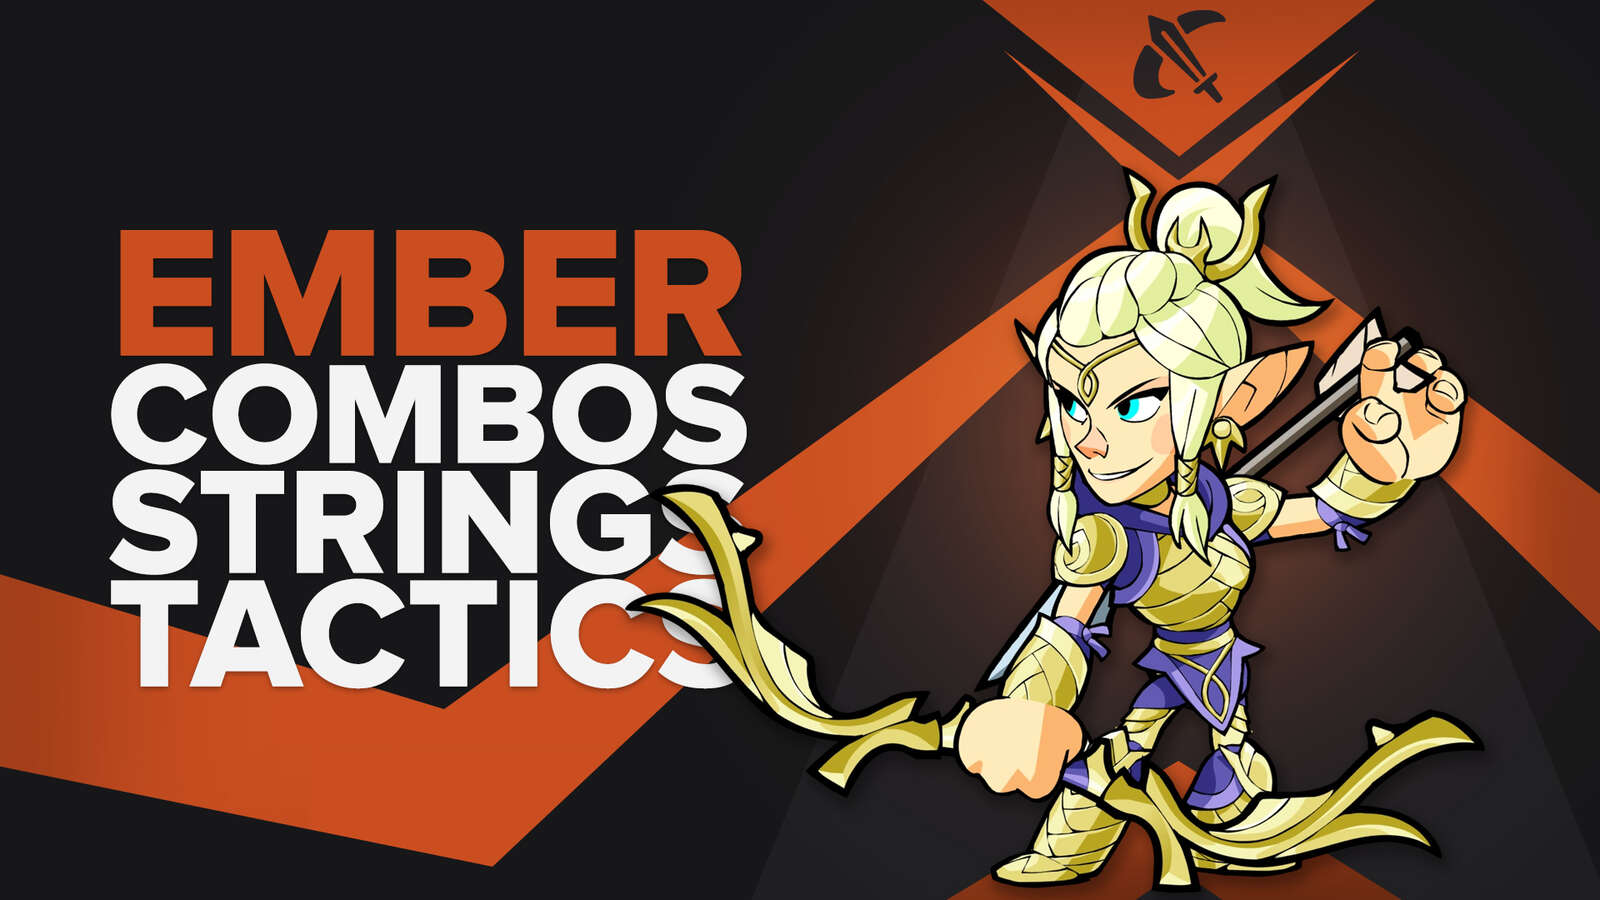 Best Ember combos, strings, and combat tactics in Brawlhalla